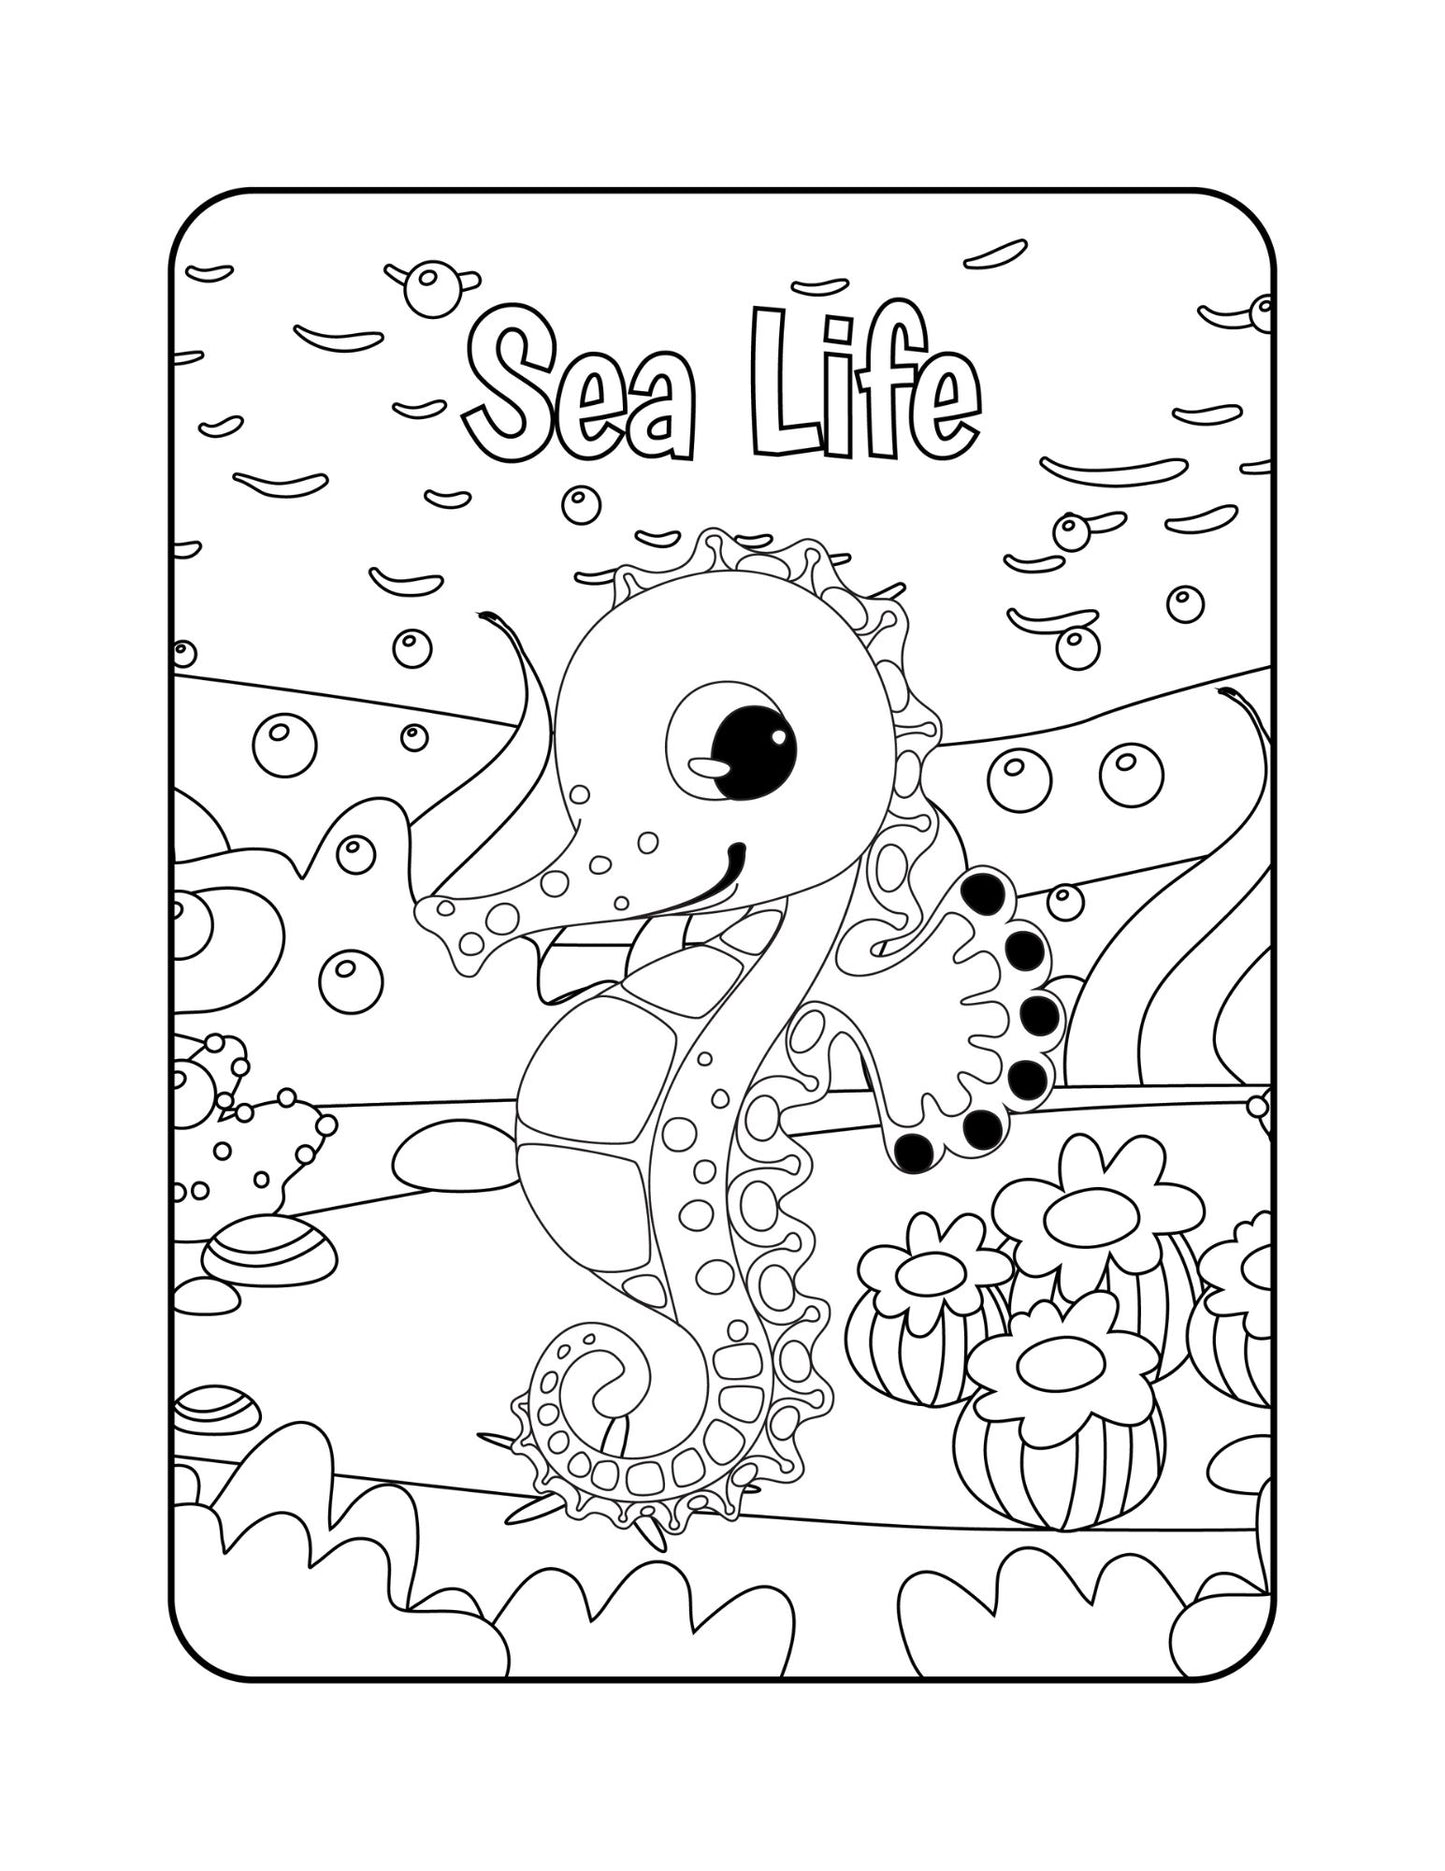 Sea Animal Coloring Book For Kids And Adults Relaxation Kids Coloring Books Coloring For Kids Child Coloring Book Coloring Activity Pages